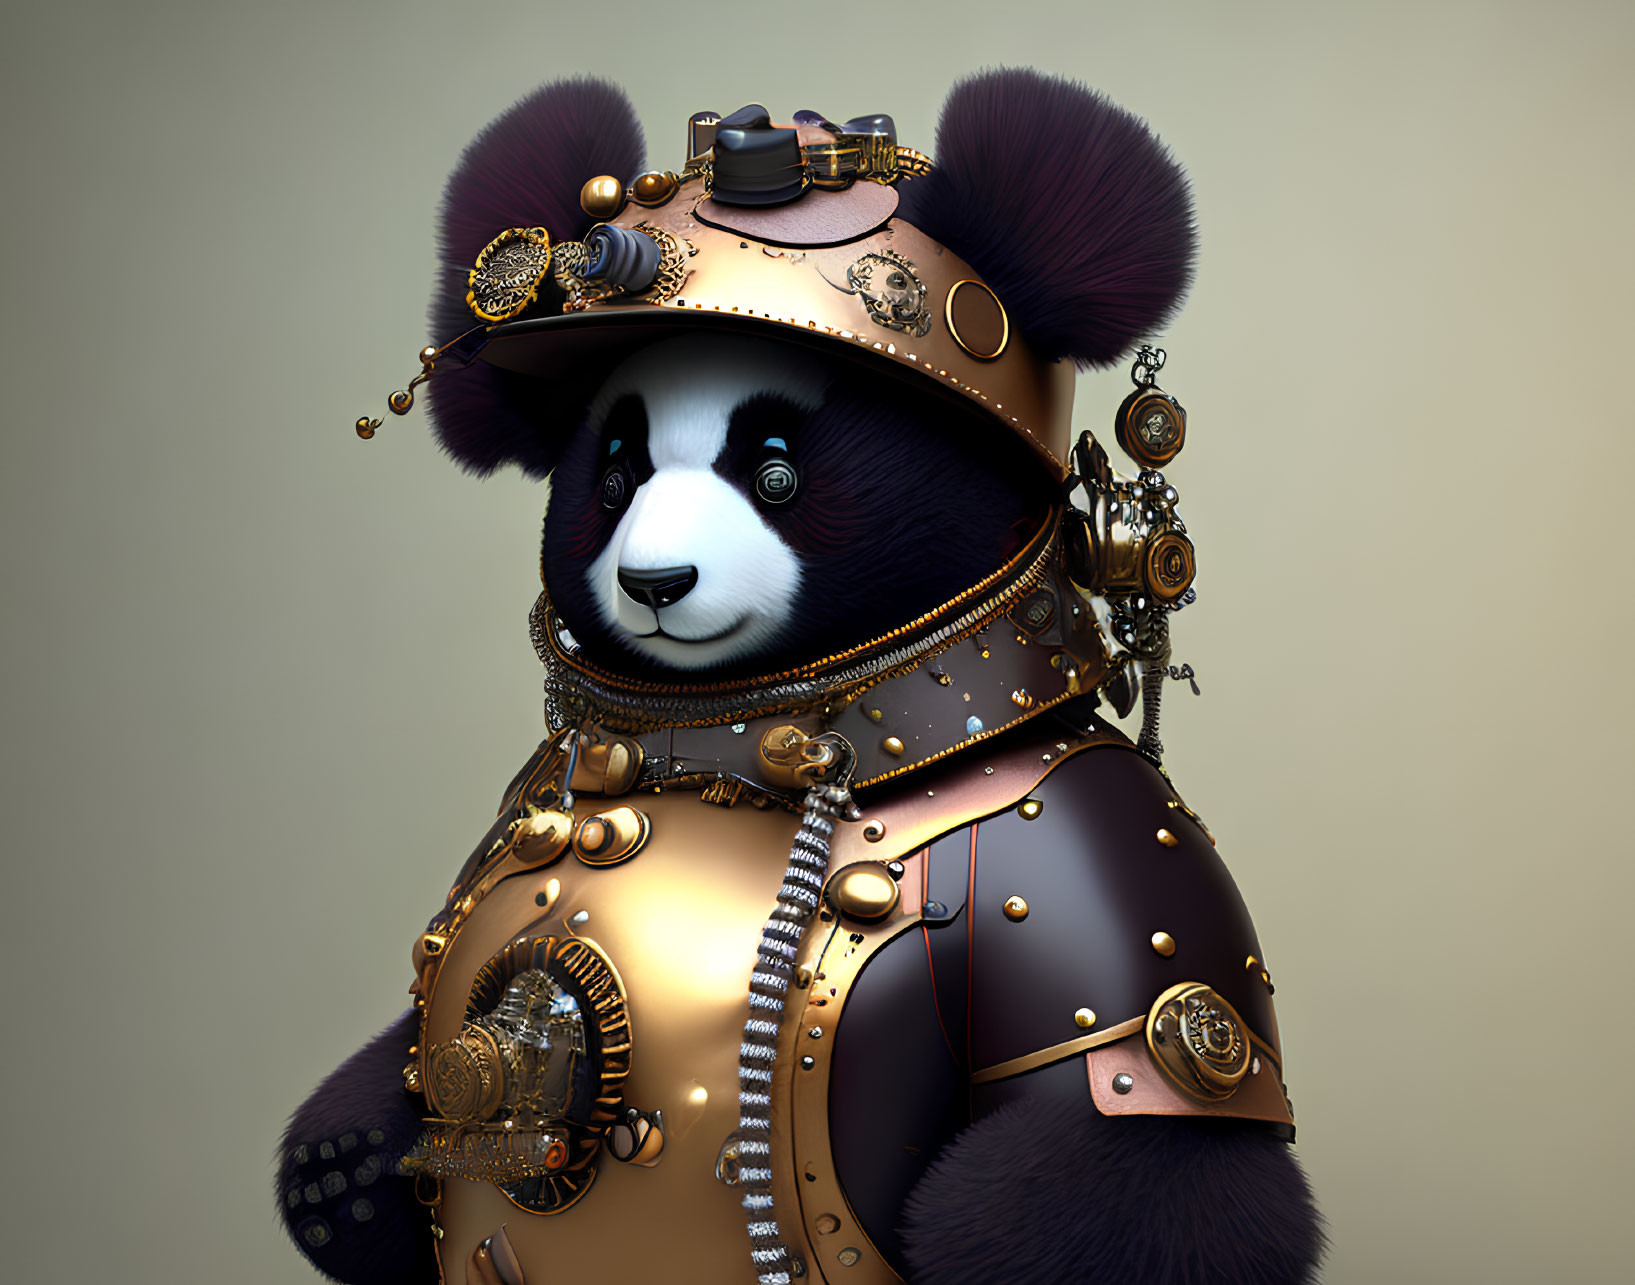 Steampunk Panda Digital Artwork with Brass and Leather Outfit